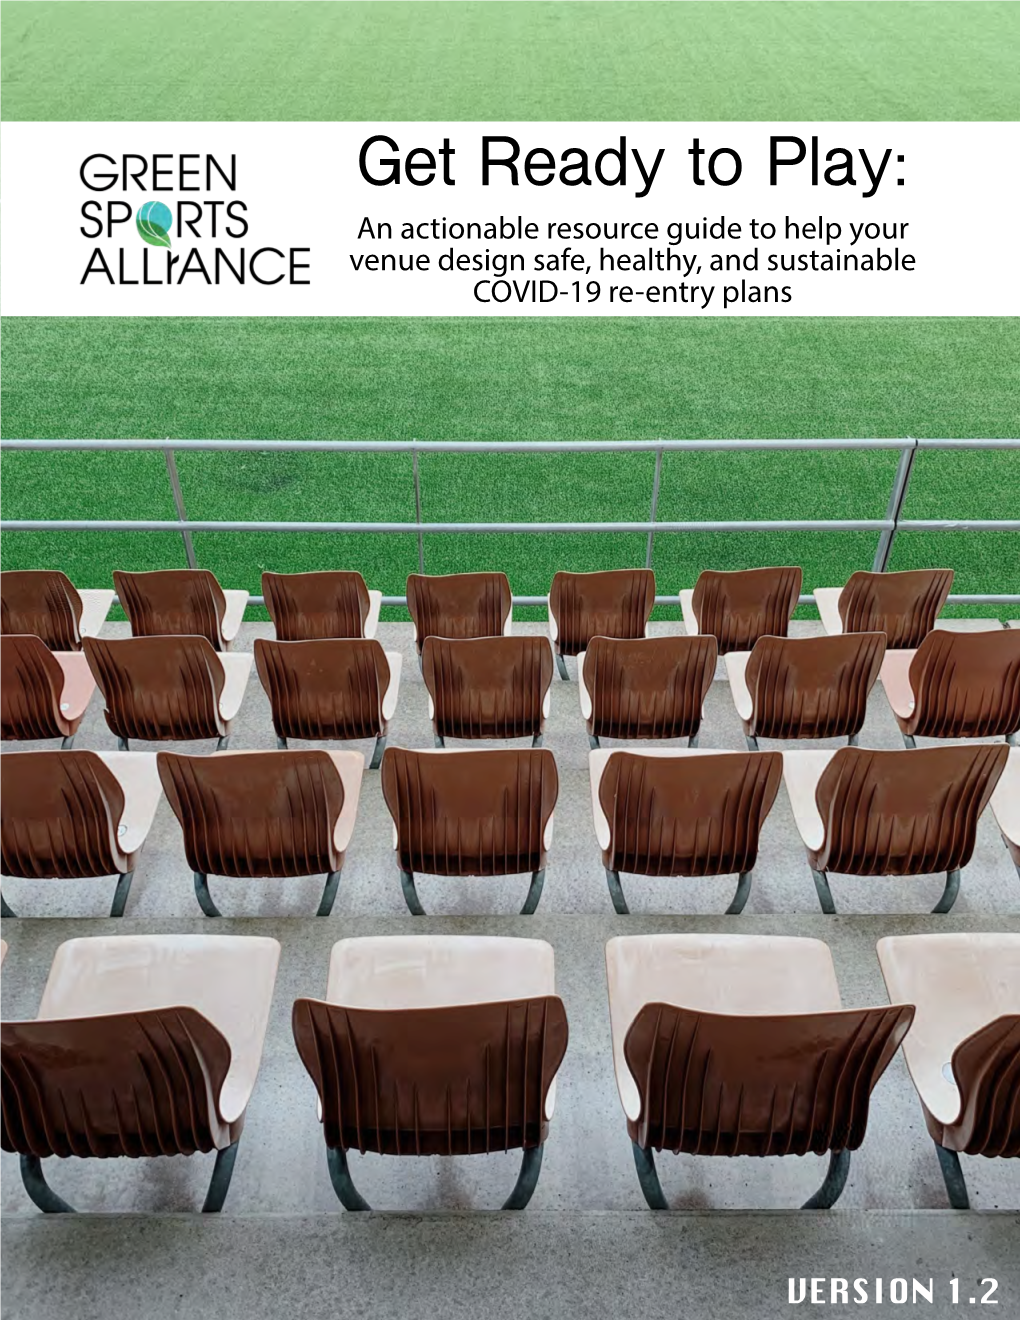 Get Ready to Play: an Actionable Resource Guide to Help Your Venue Design Safe, Healthy, and Sustainable COVID-19 Re-Entry Plans